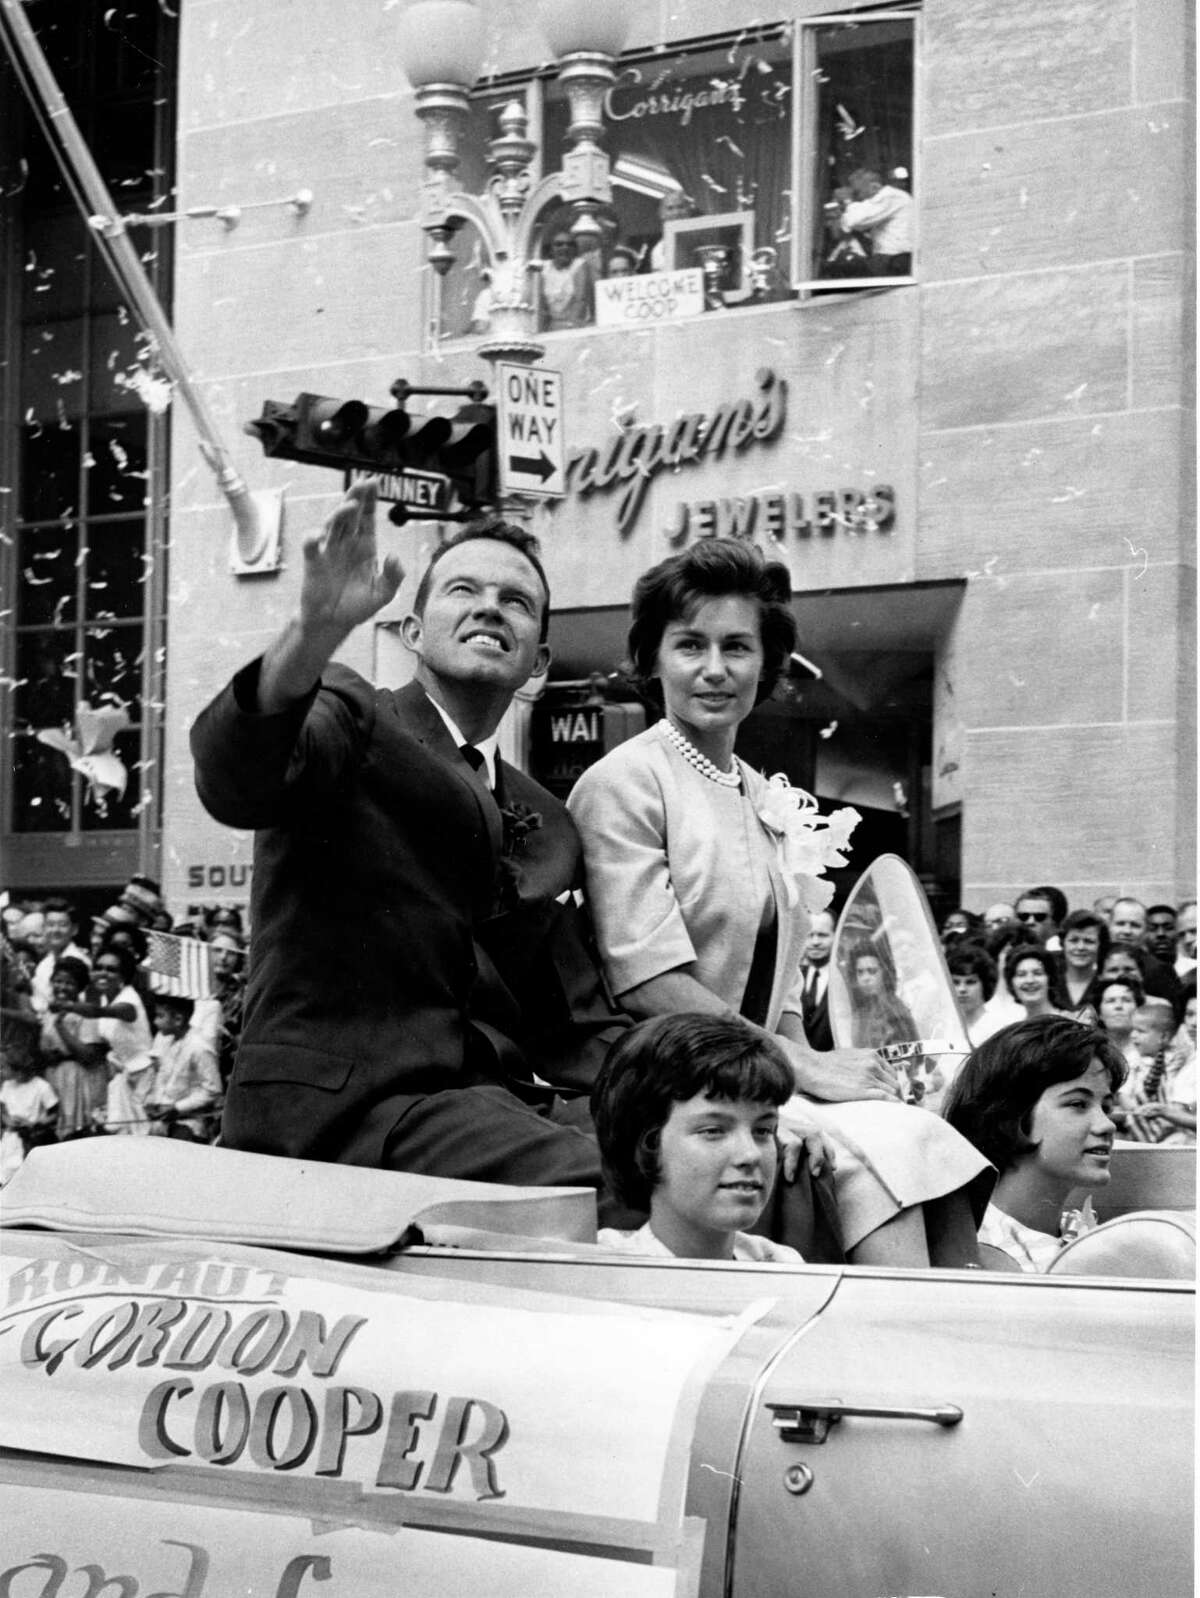 05/23/1963 - Astronaut L. Gordon Cooper waves to the crowd lining the streets of downtown Houston. Cooper rides with his wife, Trudy, and two daughters in the ticker-tape parade held in his honor following his completion of the sixth Mercury manned spaceflight. On May 15-16, 1963, he circled the Earth 22 times in the space capsule Faith 7.